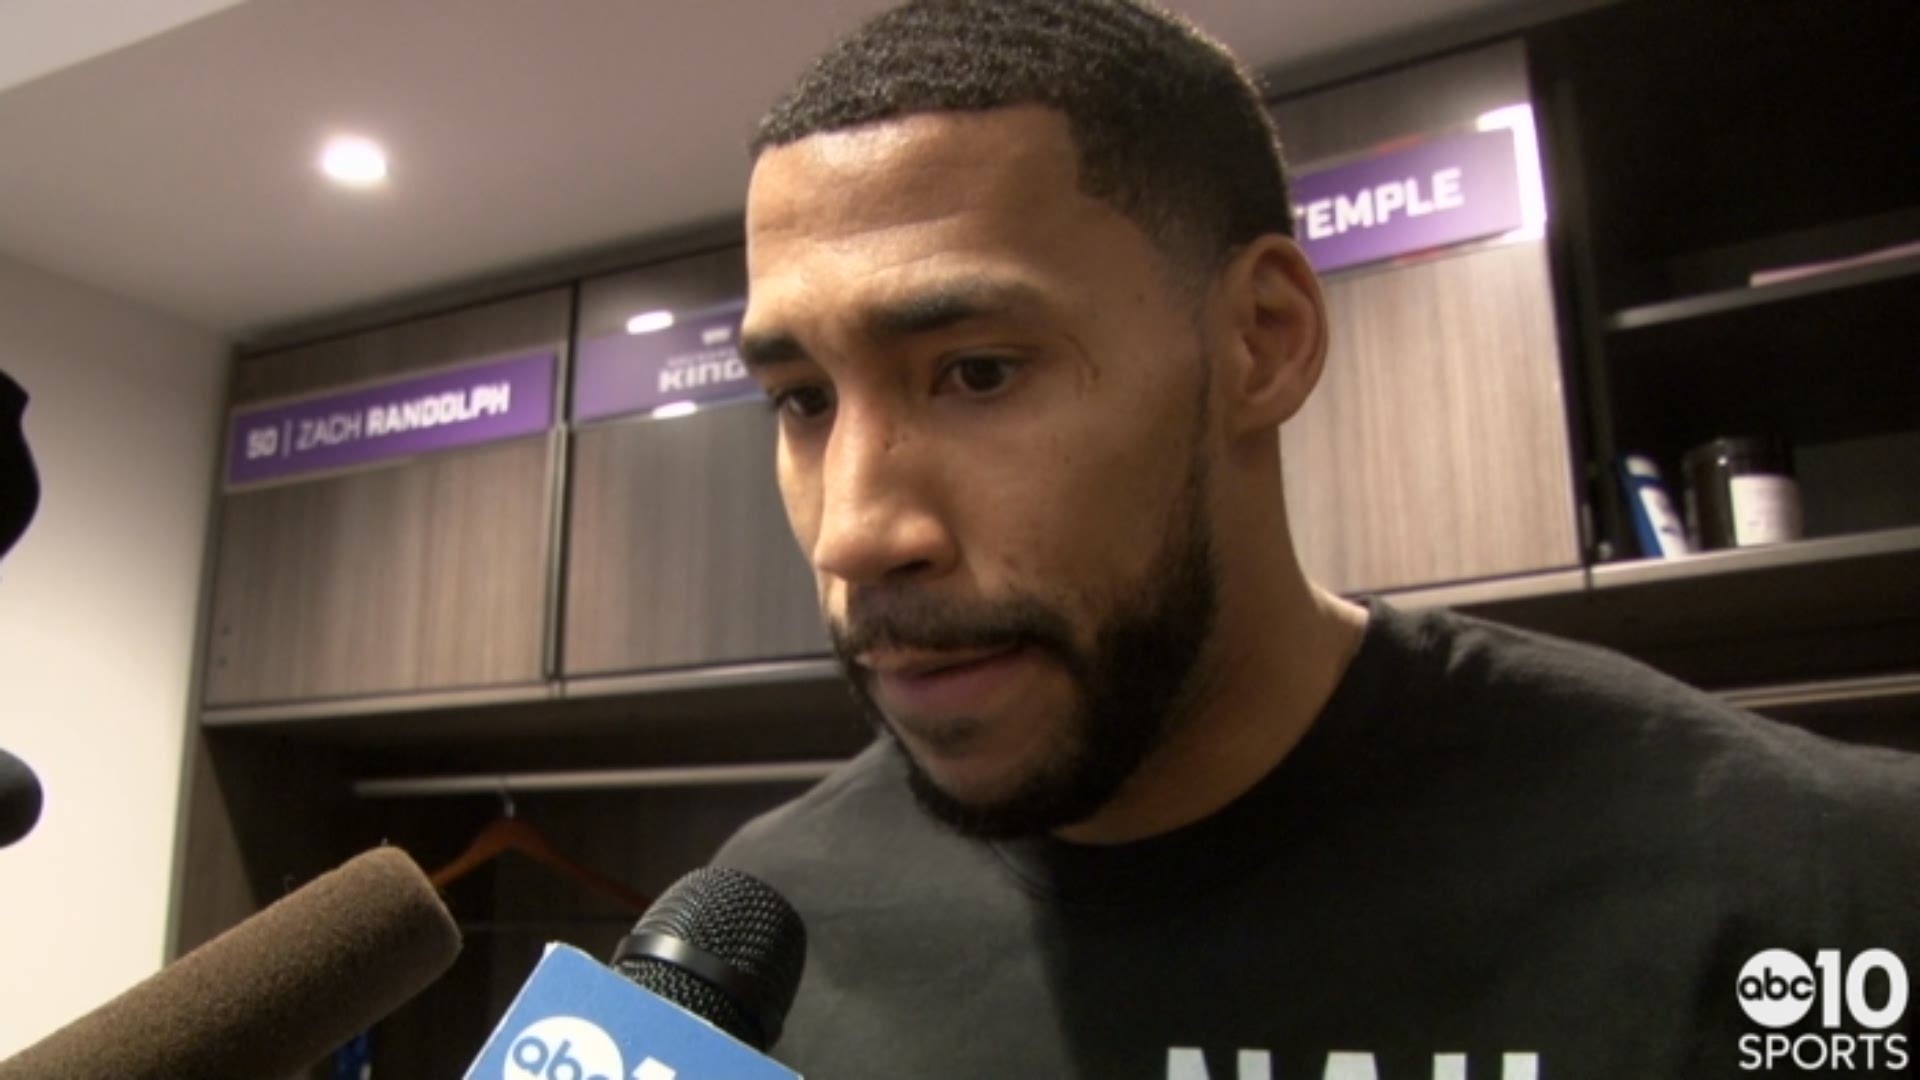 Kings forward Garrett Temple chats about Wednesday's home win over the Cleveland Cavaliers, wanting to defend LeBron James, the performance of 40-year-old teammate Vince Carter and winning a "linear championship."